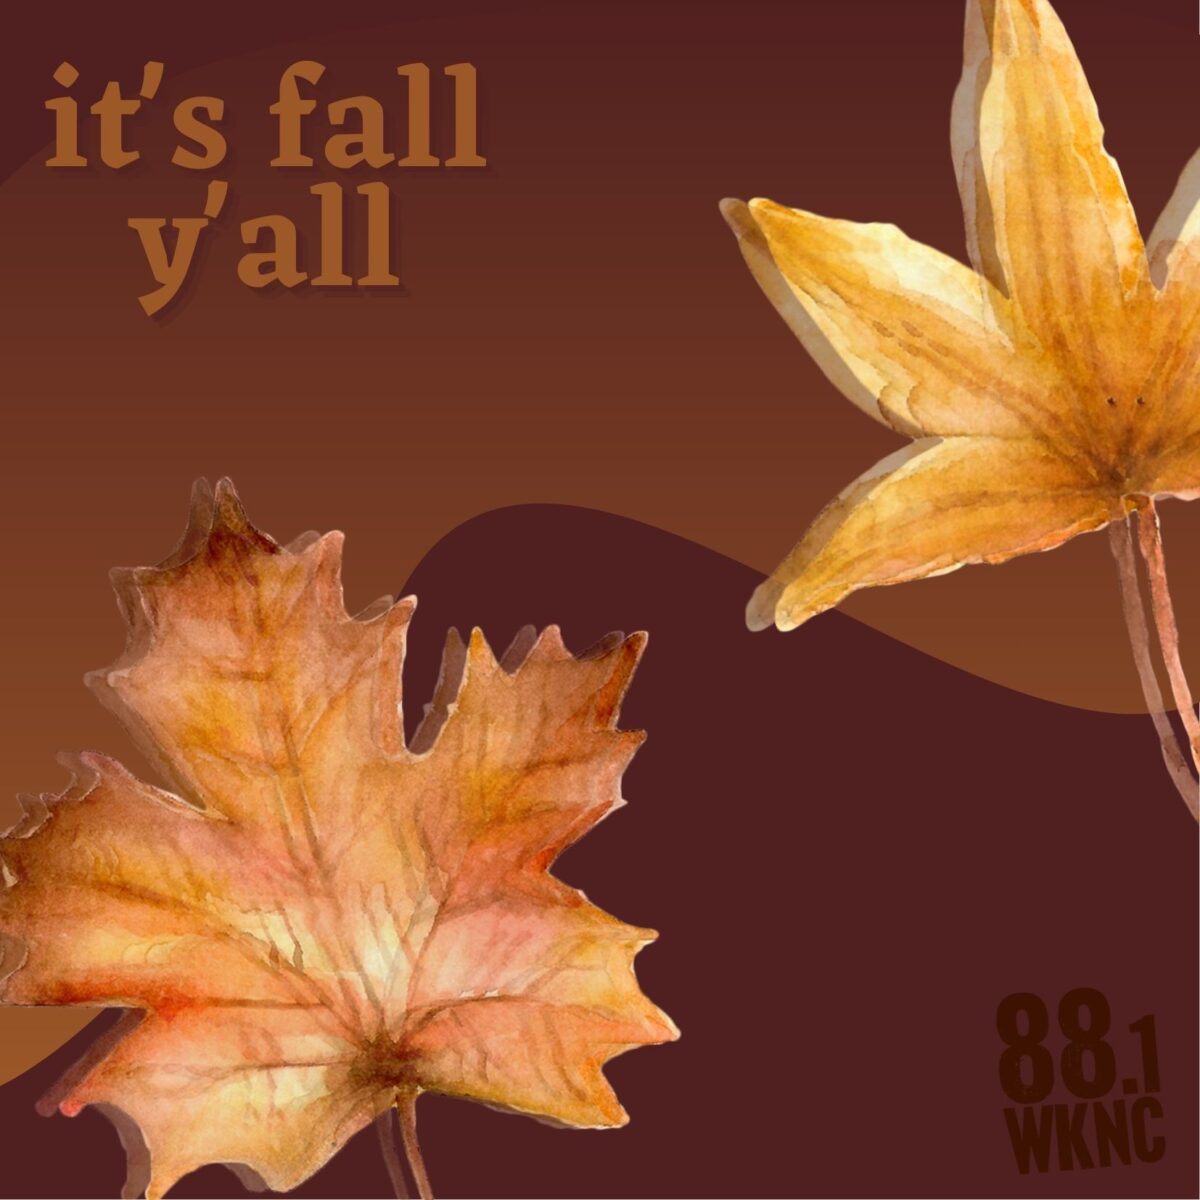 Brown background image with red and orange leaves overlayed with text that reads "it's fall y'all" in the upper left hand corner and "88.1 WKNC" in the bottom left hand corner